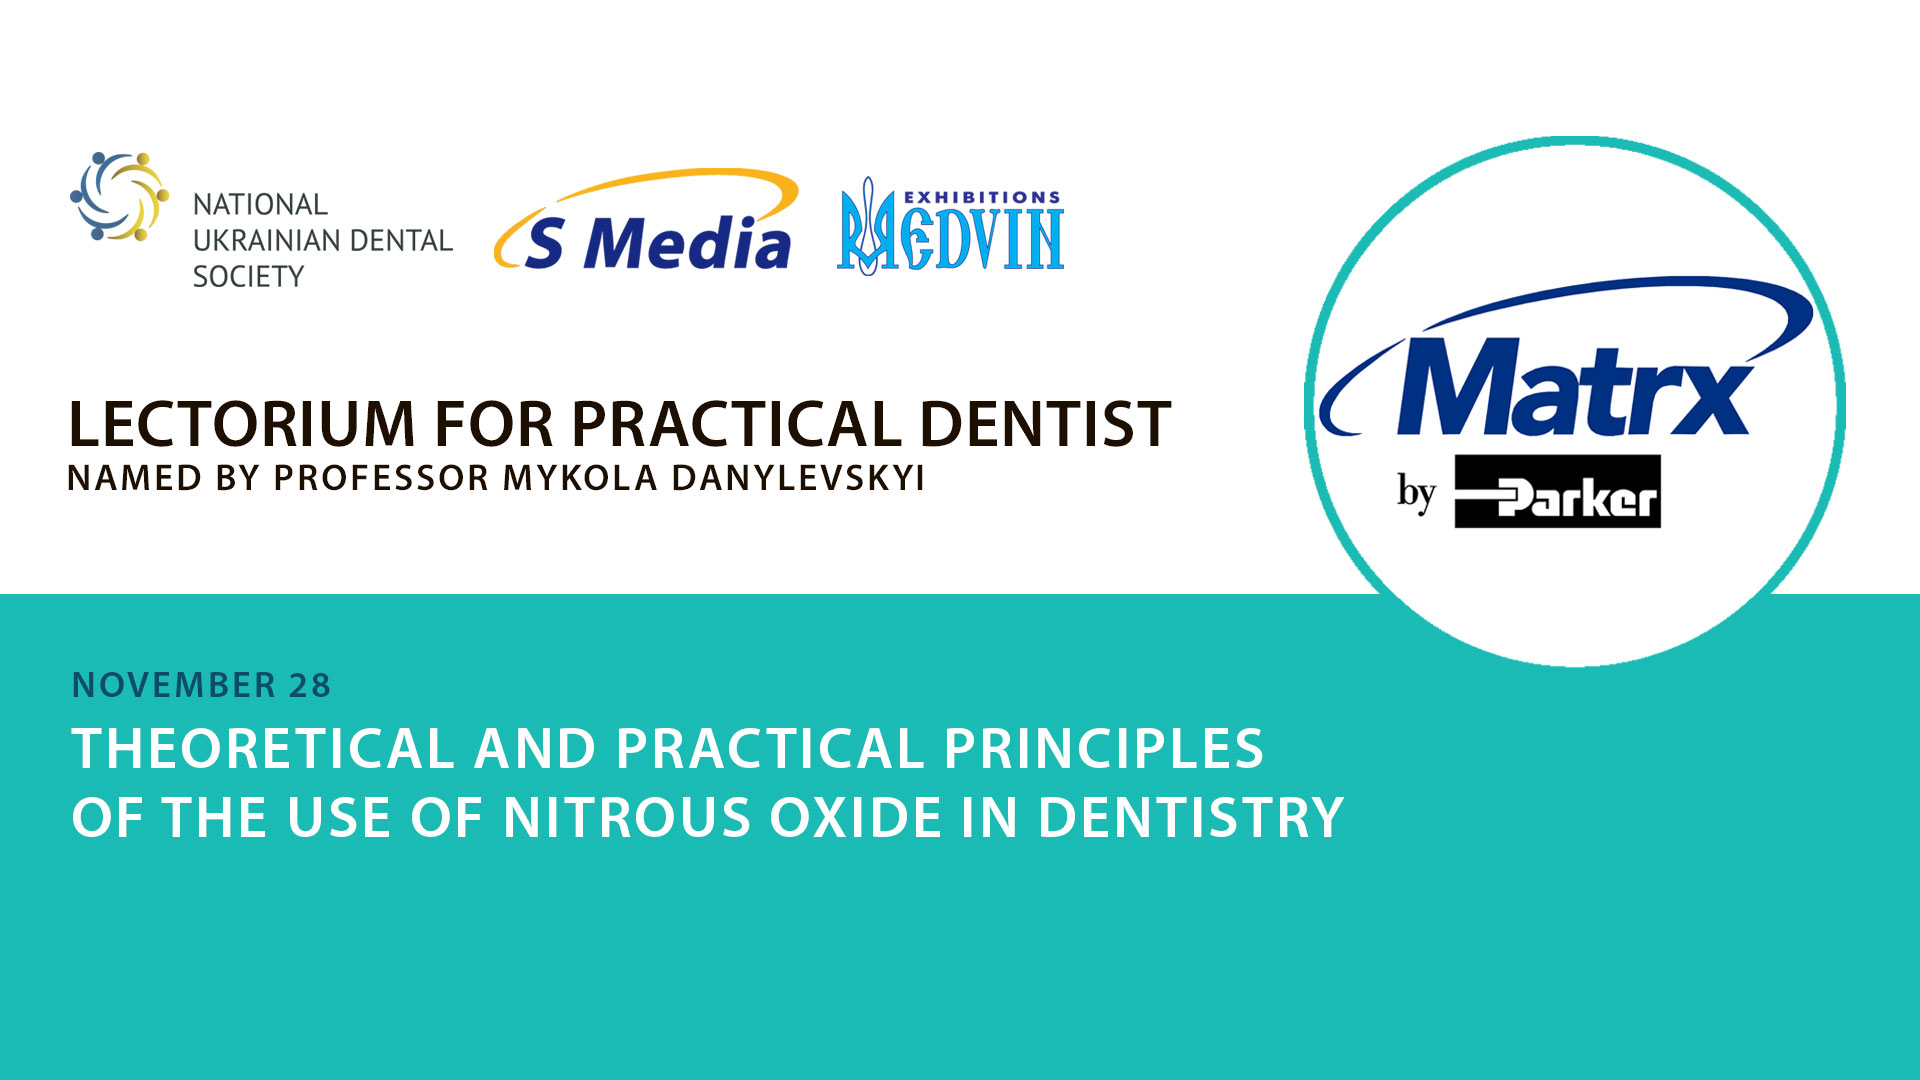 Theoretical and practical principles of the use of nitrous oxide in dentistry - 28.11.19